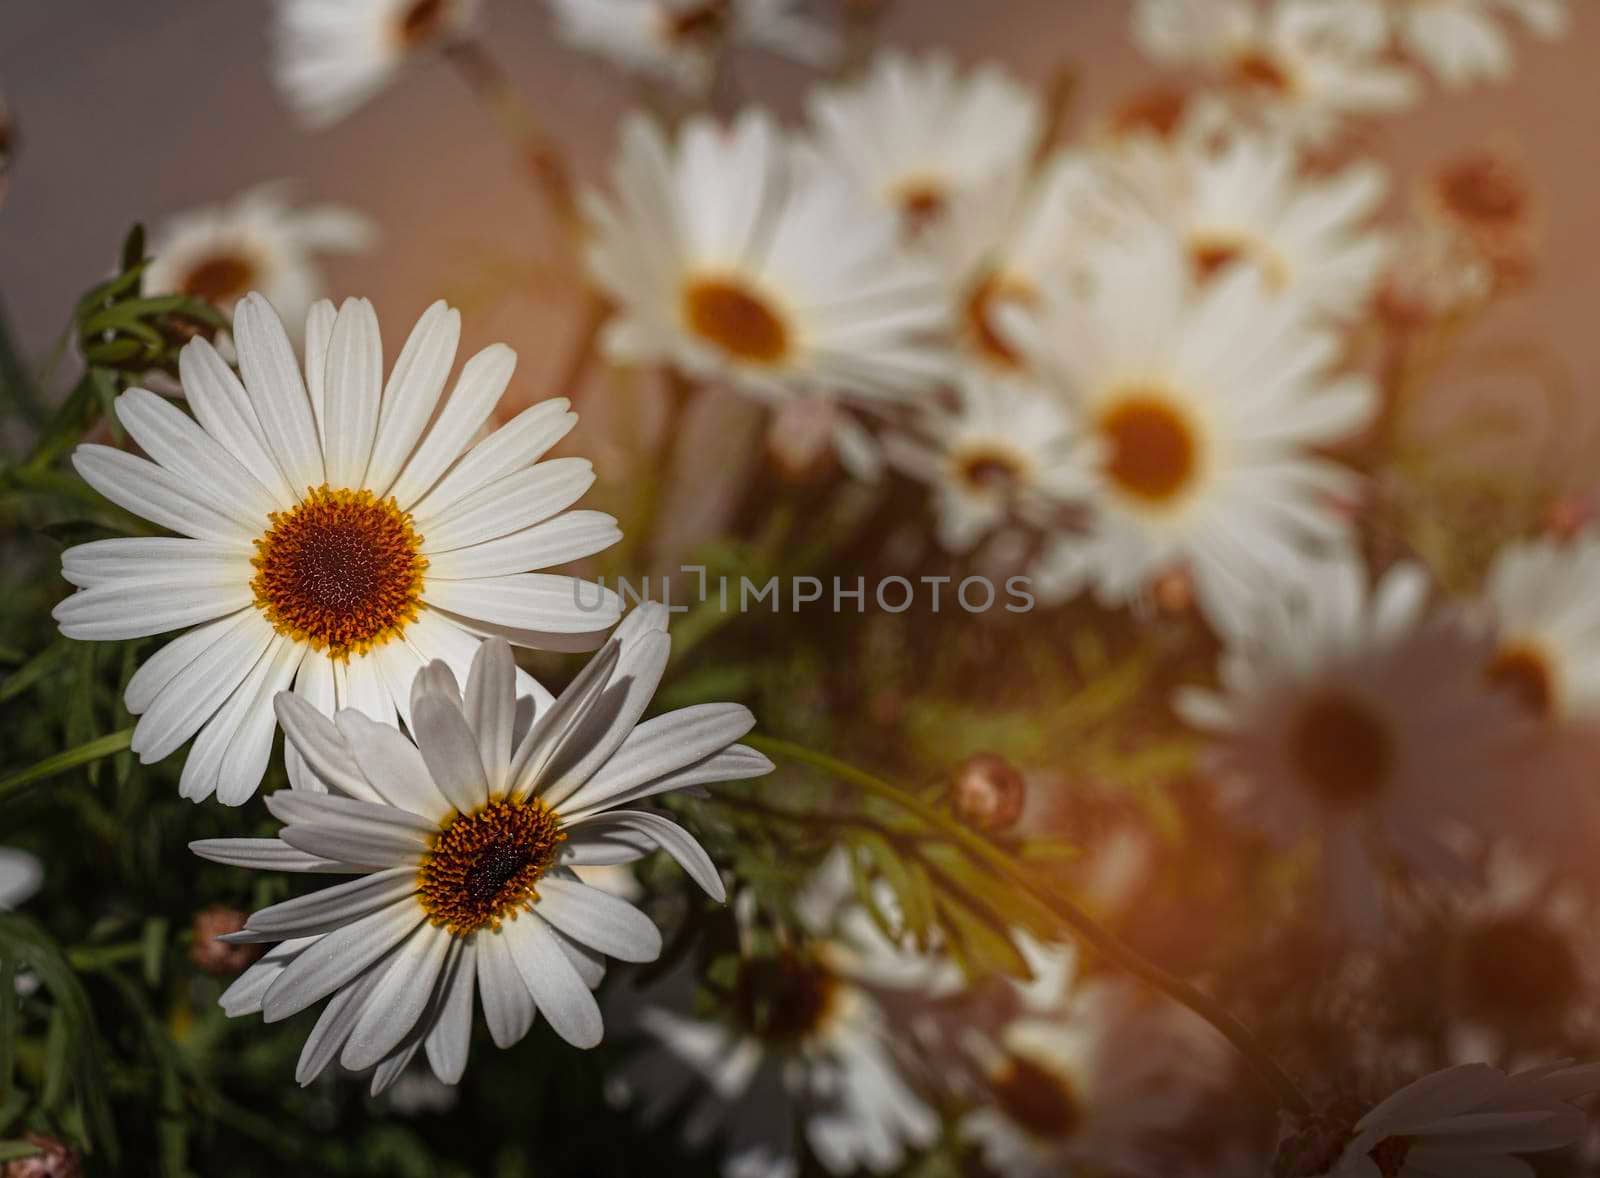 Large decorative daisies in the garden sunset.